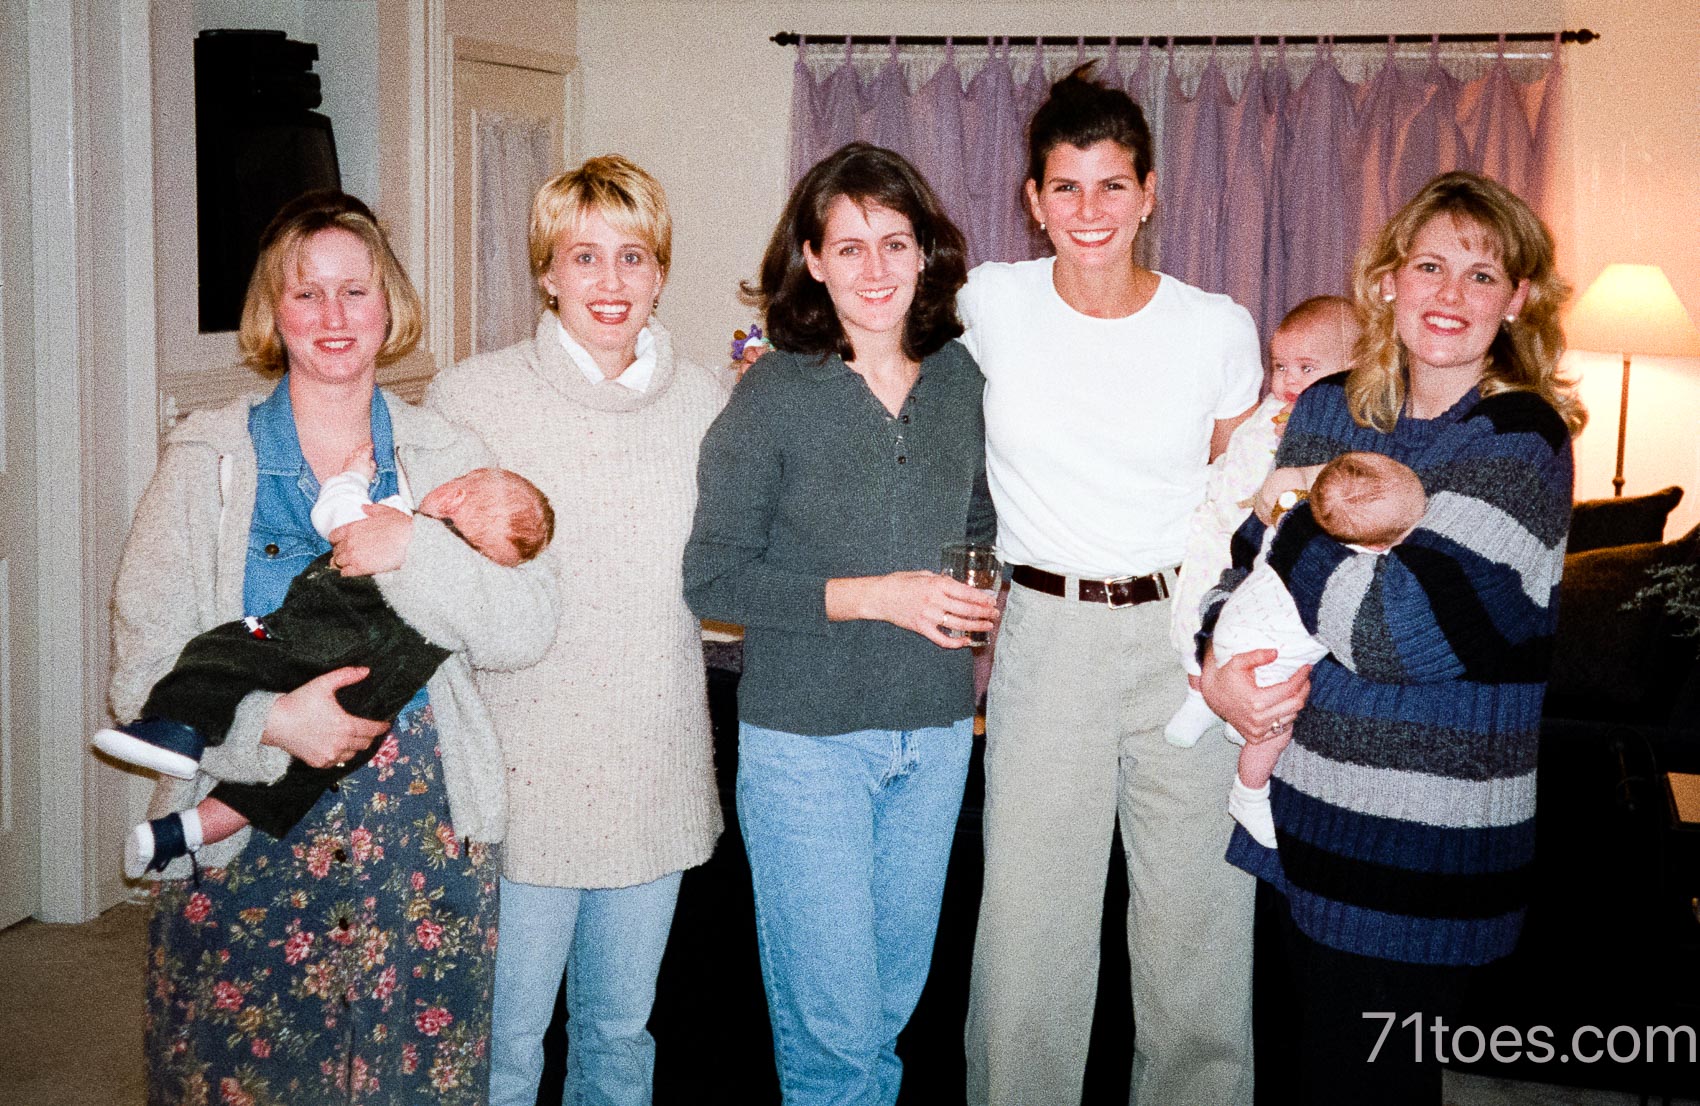 Shawni and Shelley, the flatbread maker, with other dear mom friends and a few babies